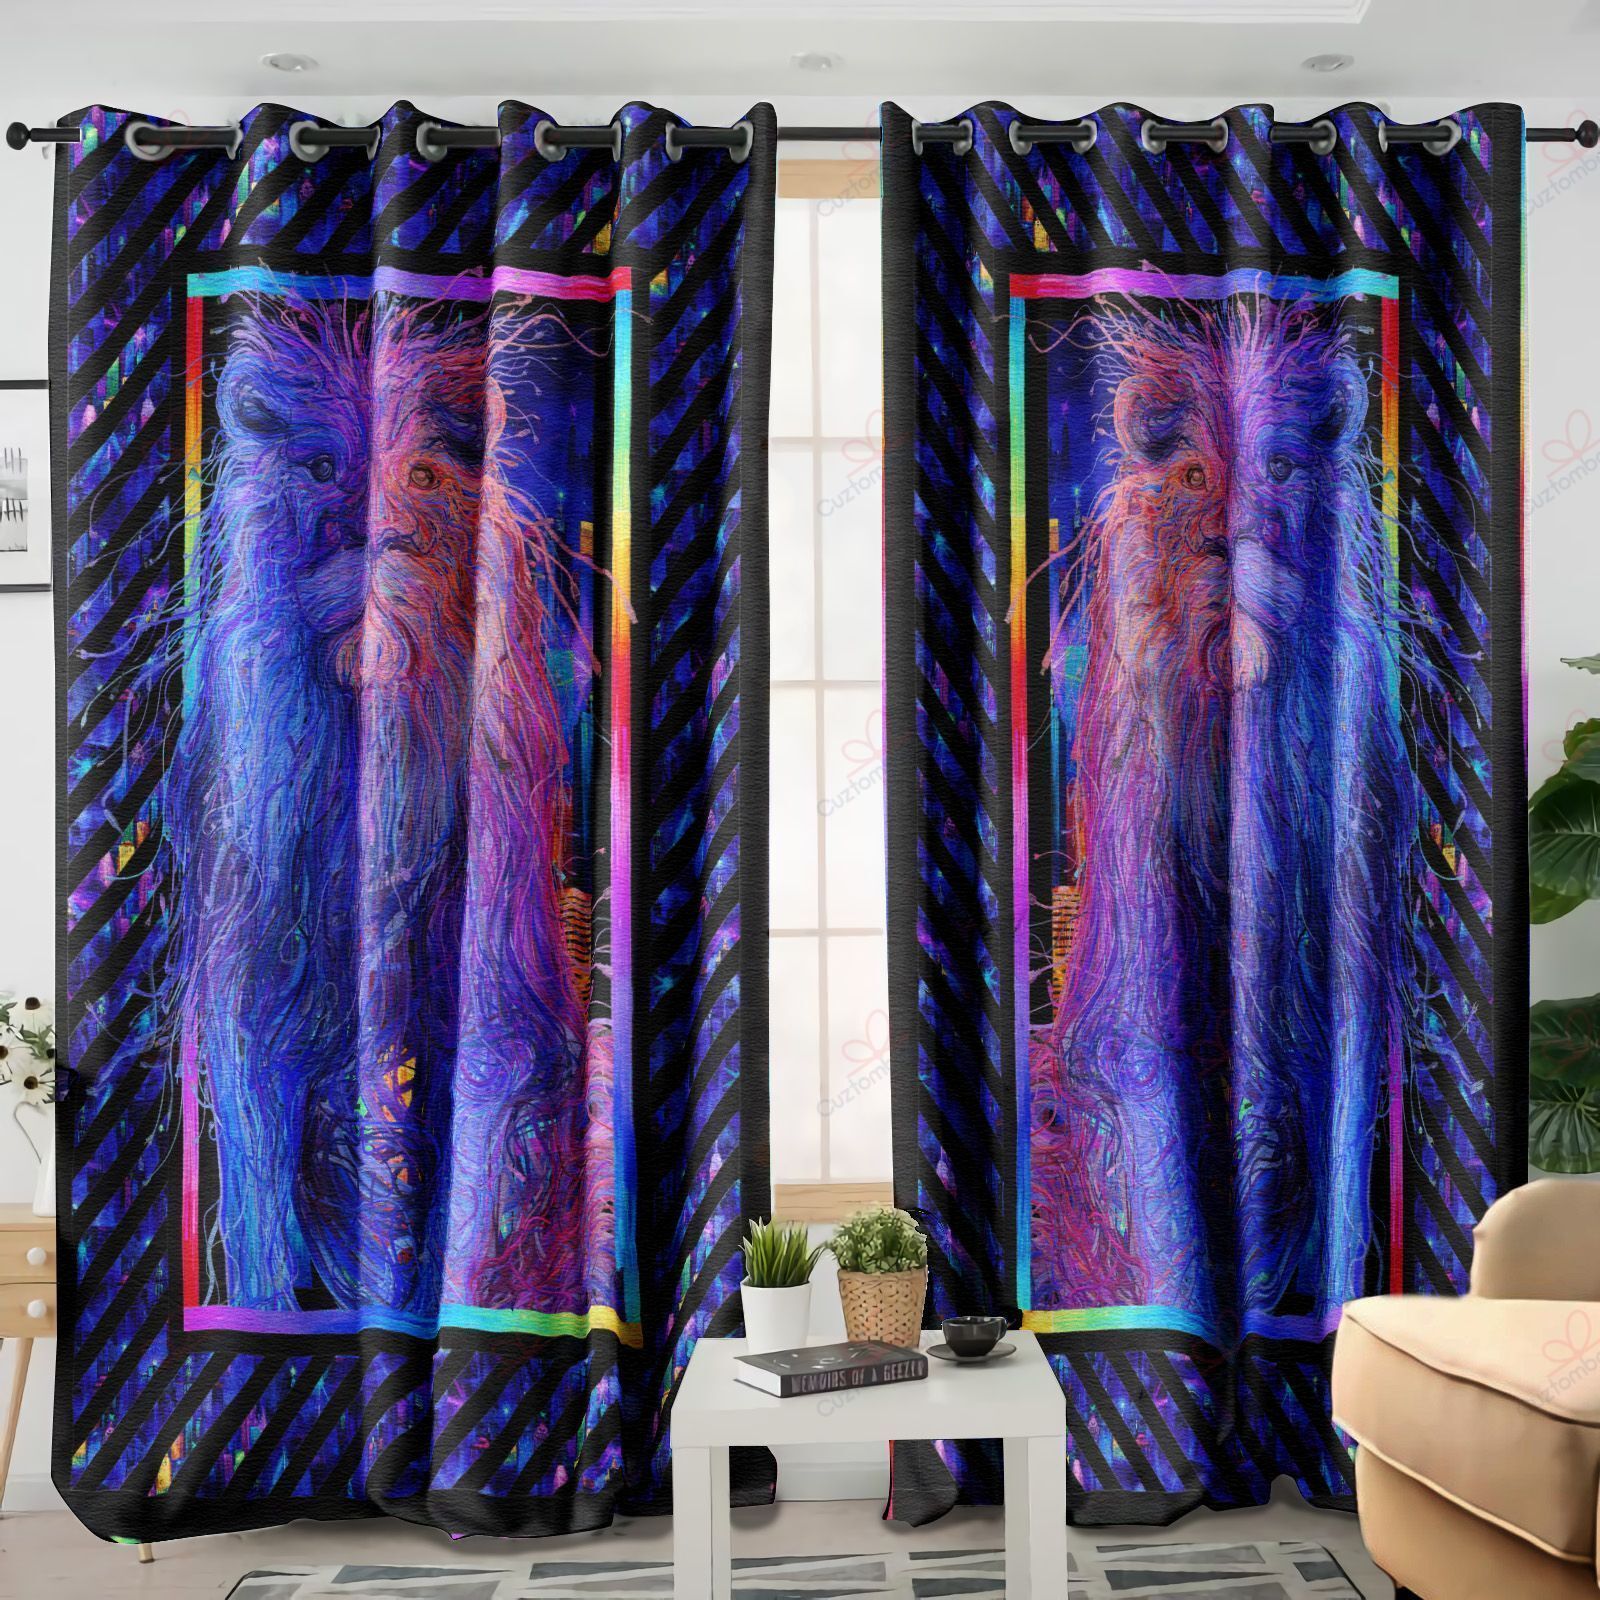 Wild Lion Purple And Red Printed Window Curtain Home Decor